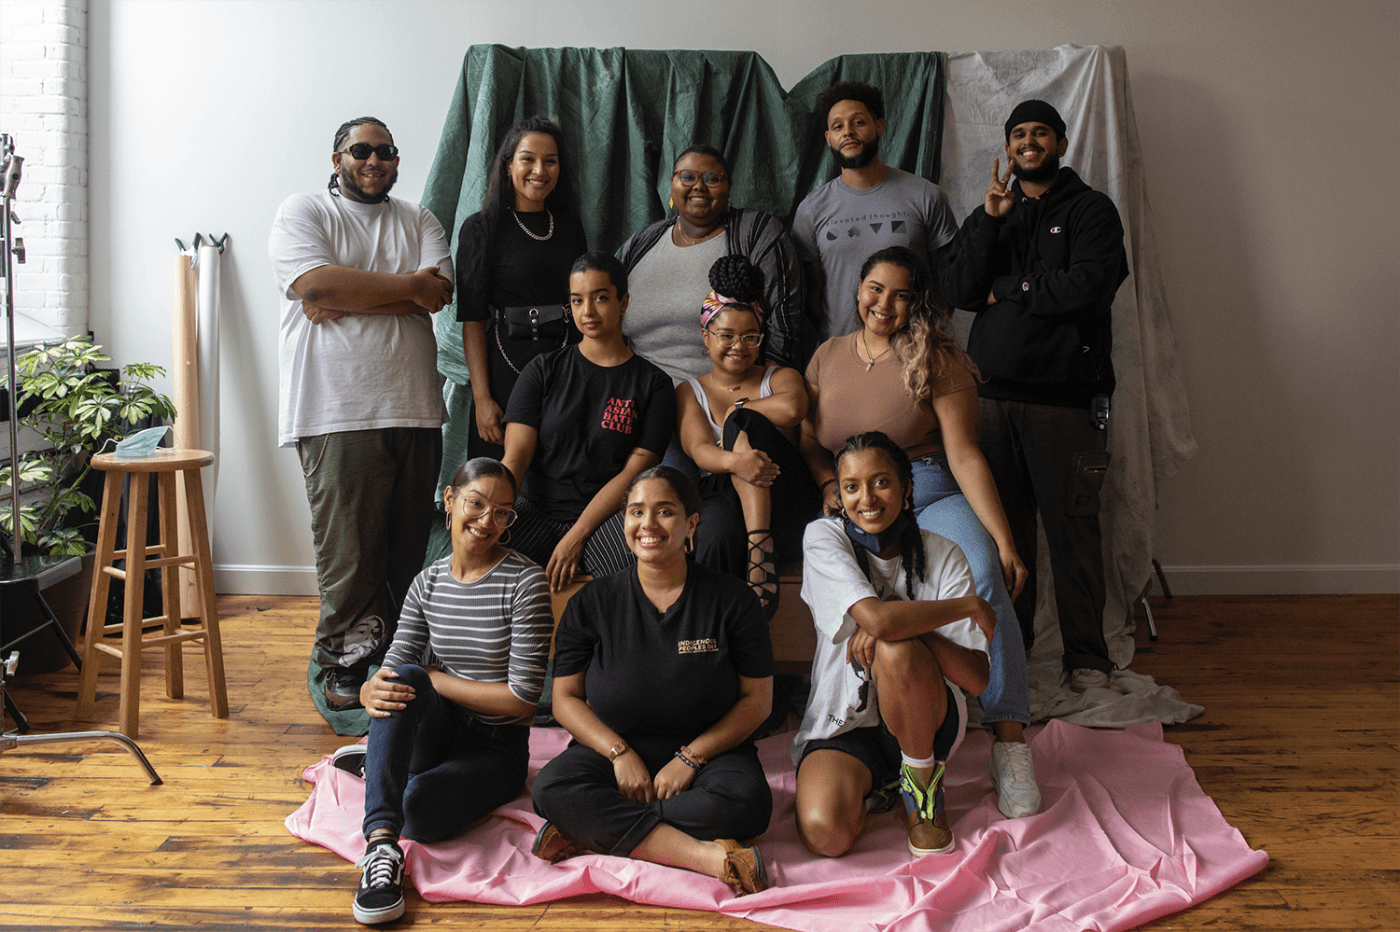 Twelve folks of color pose by some fabric laid o the ground and behind them.